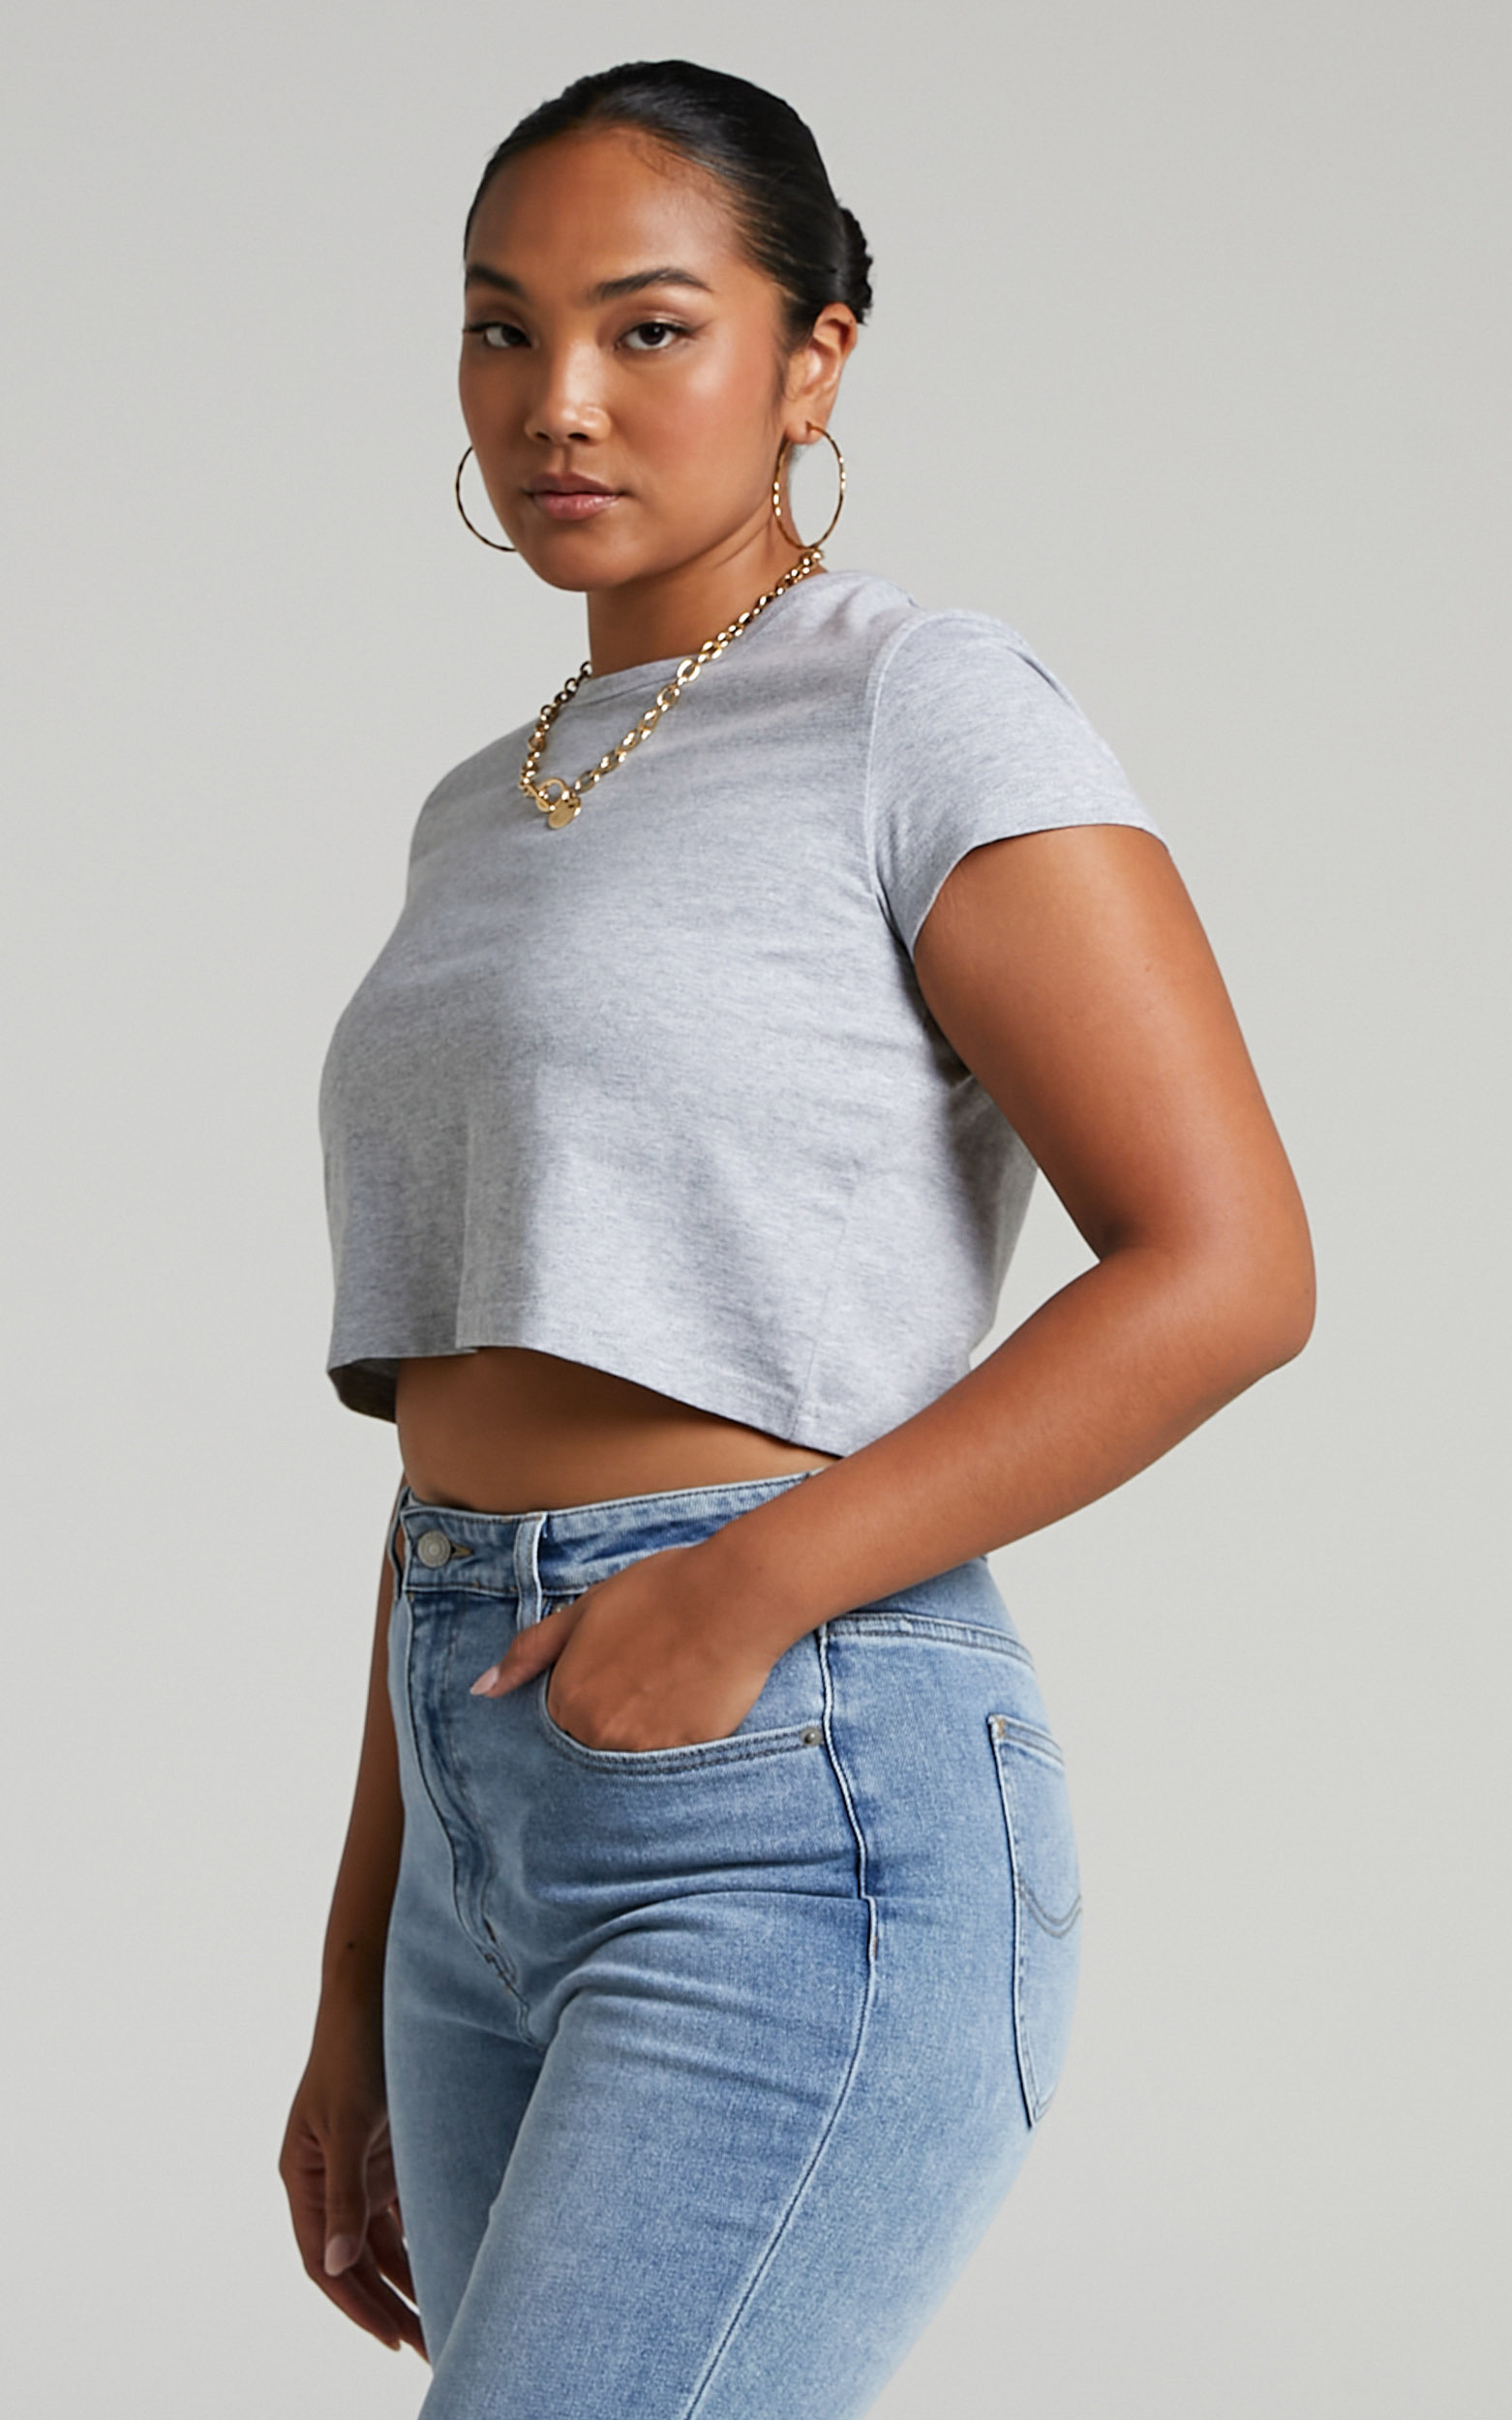 Danzel Boxy Fit Cap Sleeve Crop Top in Grey - 06, GRY2, hi-res image number null